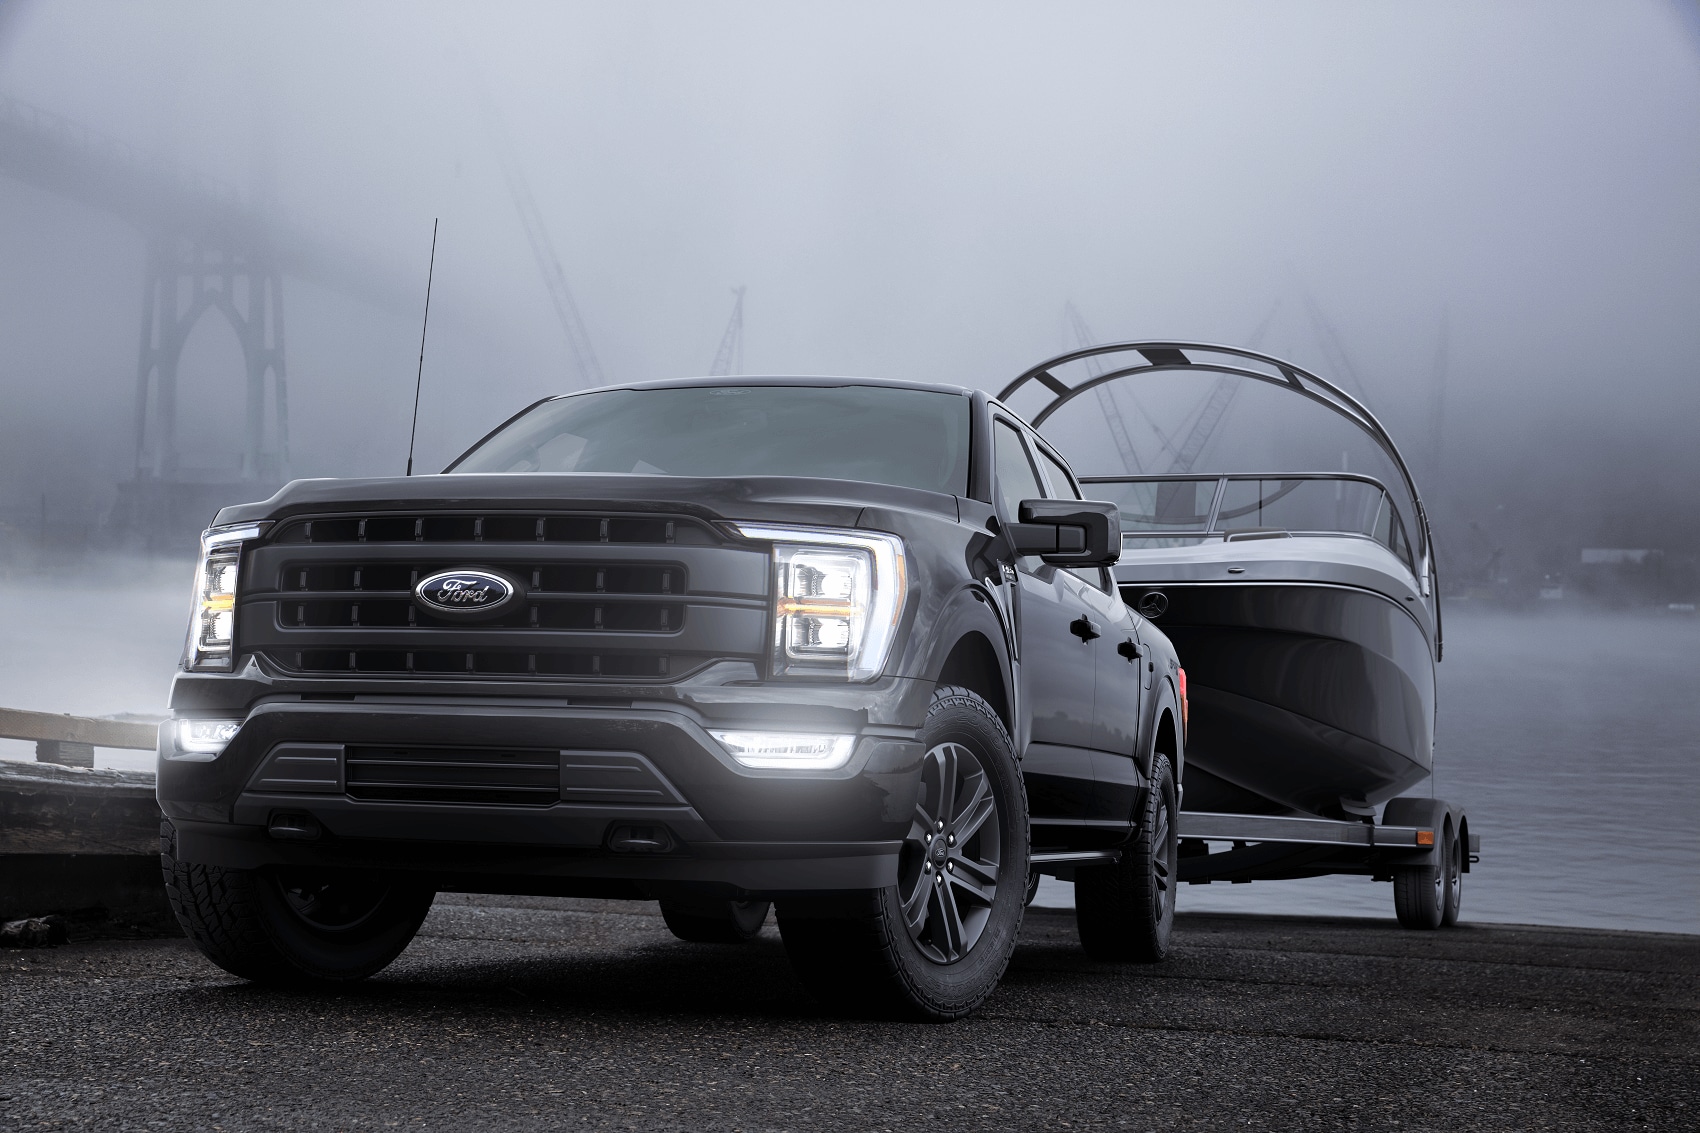 2021 Ford F-150 Towing Capacity | Fred Beans Ford of Mechanicsburg 2021 Ford F 150 3.3 V6 Towing Capacity